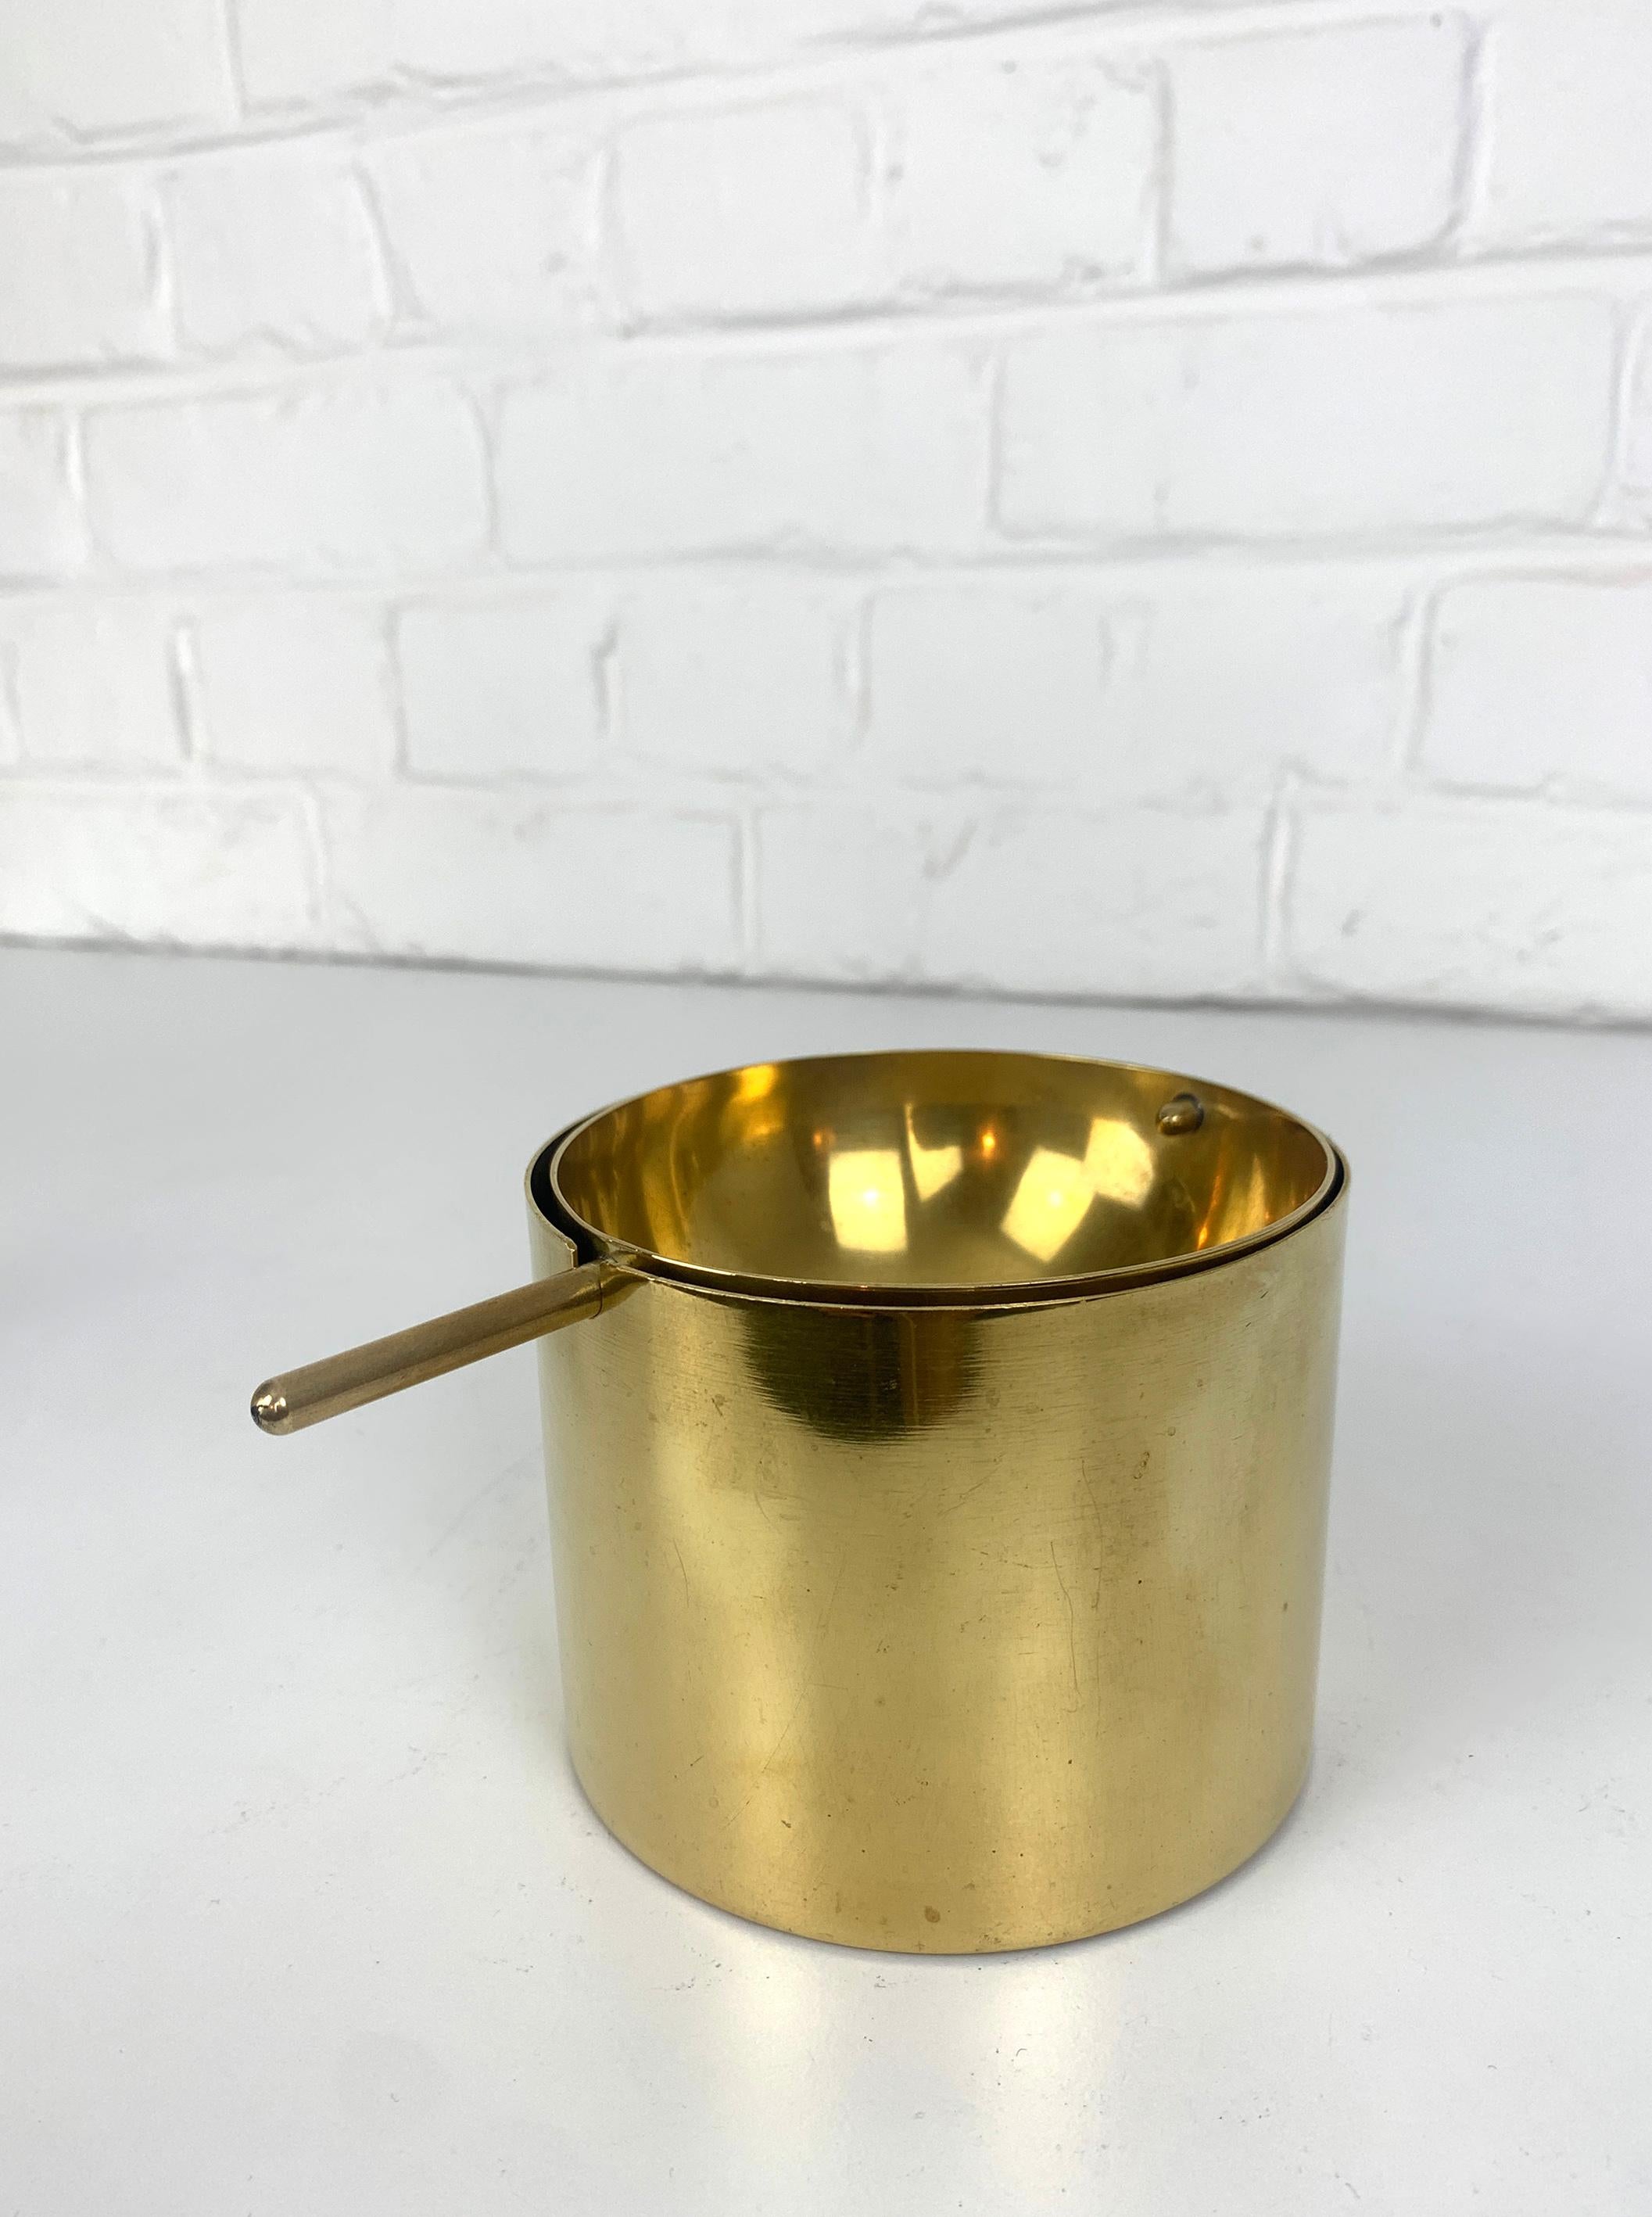 Large Brass Ashtray by Arne Jacobsen for Stelton, Cylinda-Line, 1960s For Sale 1